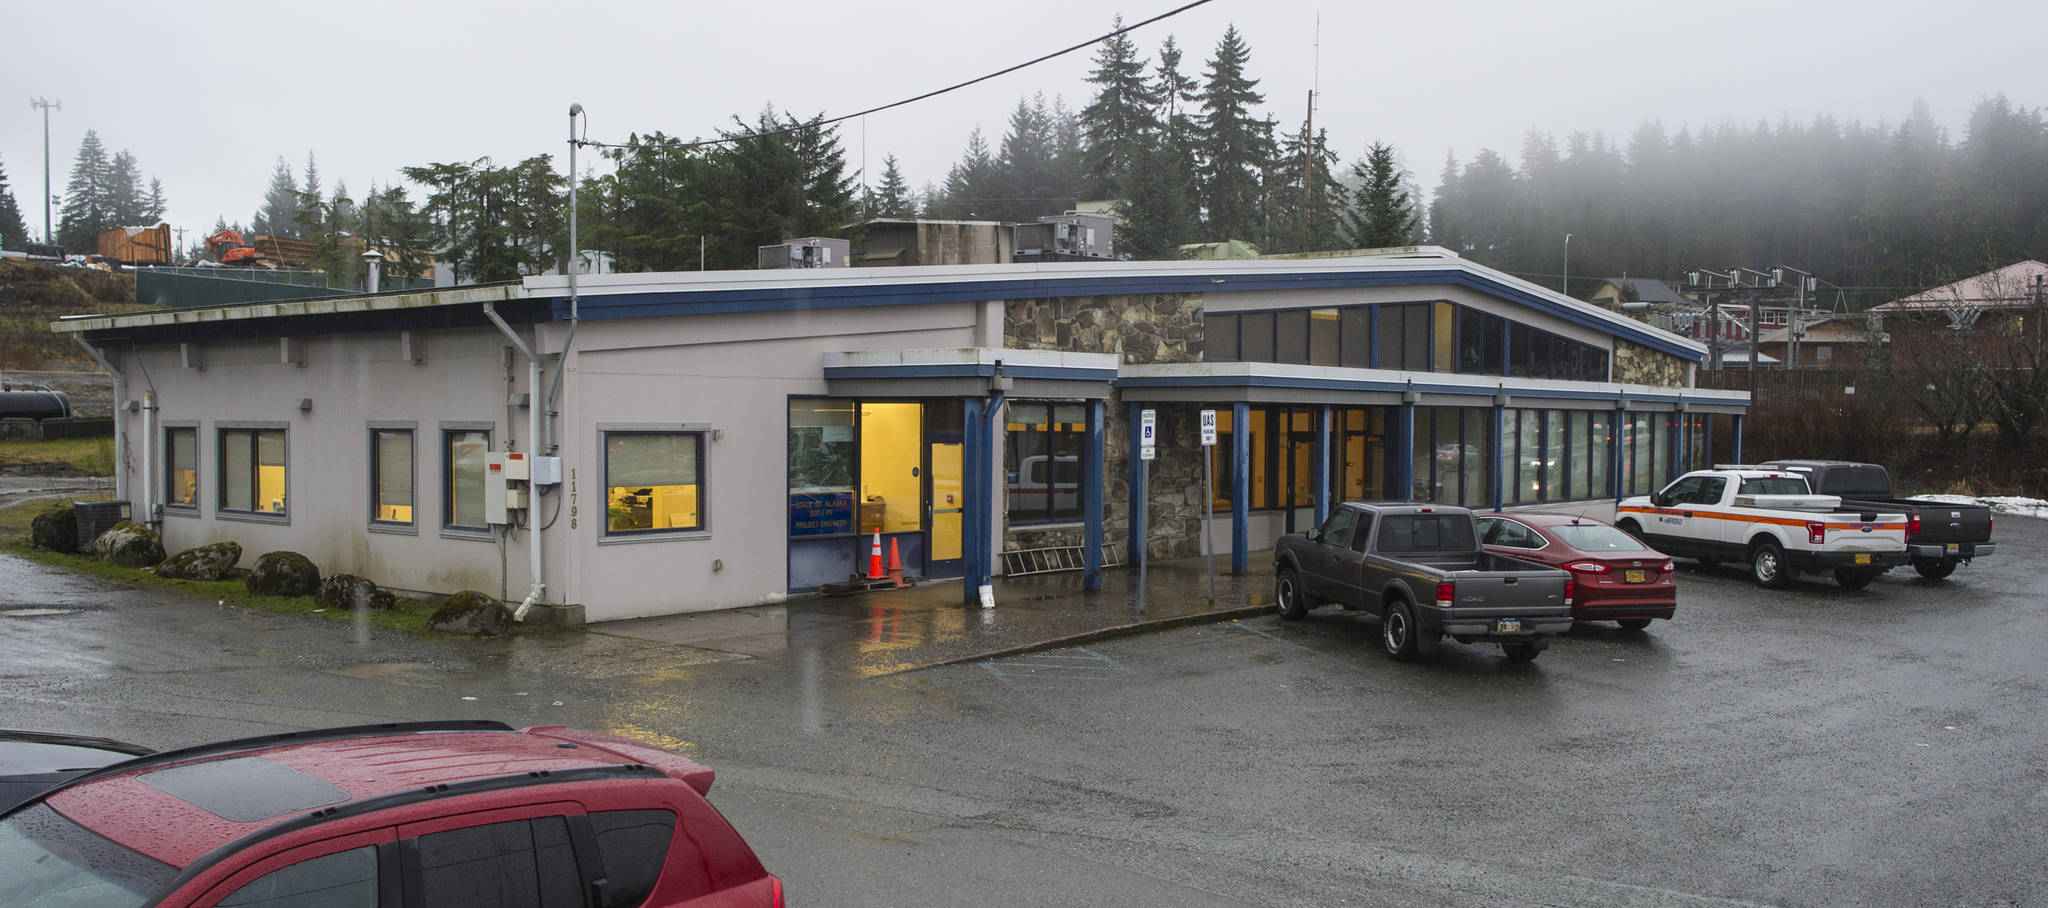 Garrett Schoenberger and Paul Simpson, of Alaska Legacy Partners, bought the previous University of Alaska Southeast book store and administration building in Auke Bay and are offering it as The Jetty for retail options in the Auke Bay area. (Michael Penn | Juneau Empire)